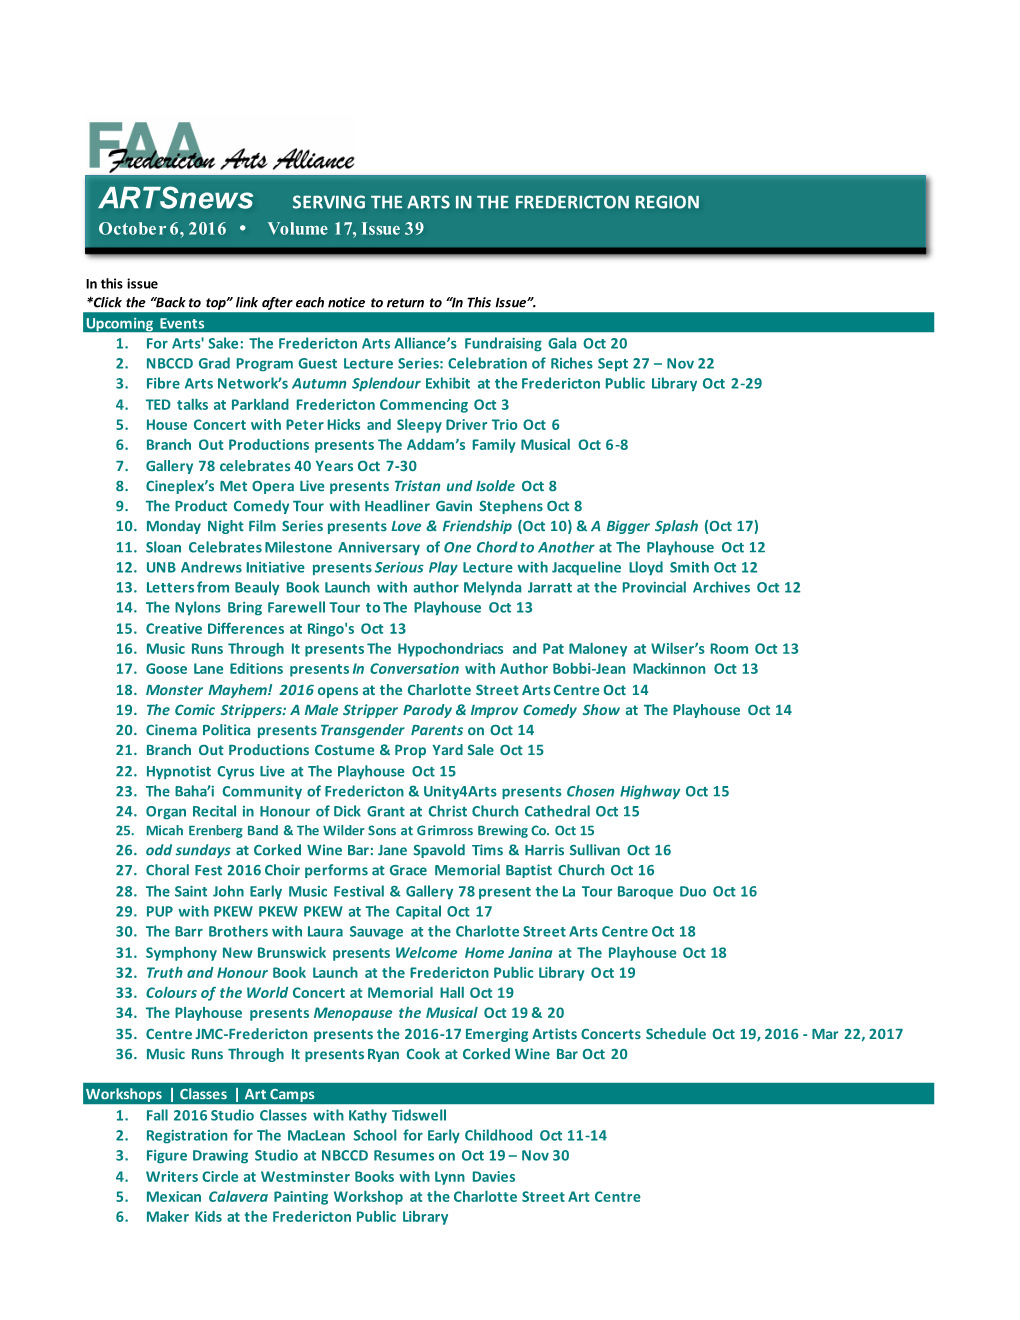 Artsnews SERVING the ARTS in the FREDERICTON REGION October 6, 2016 Volume 17, Issue 39